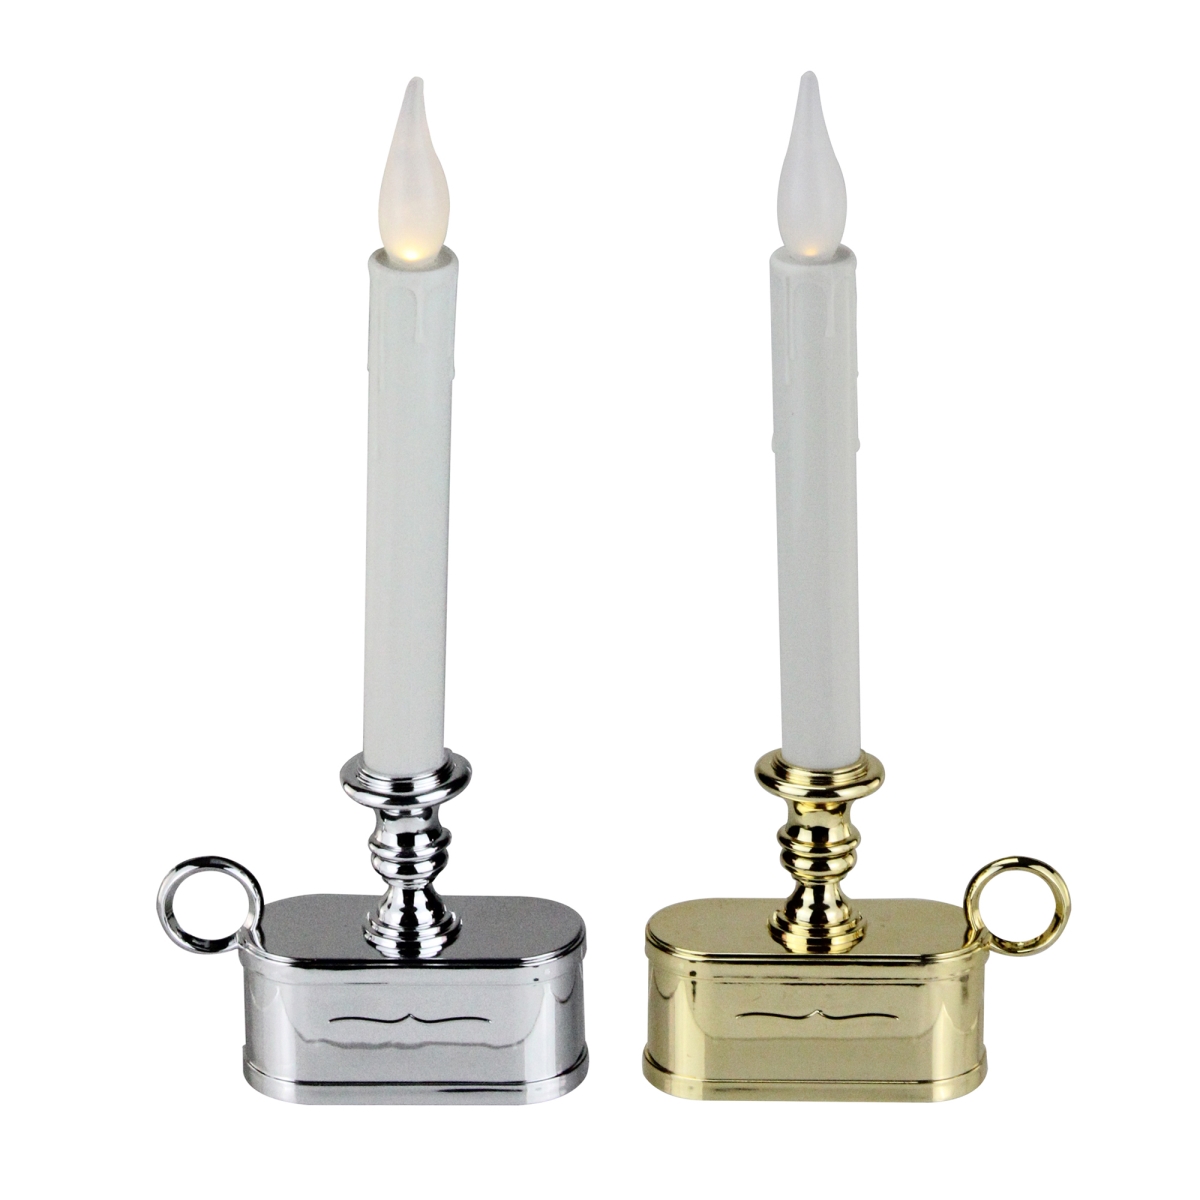 Brite Star 32813547 11 in. Club Battery Operated Gold & Silver LED Christmas Candle Lamp with Base - Pack of 12